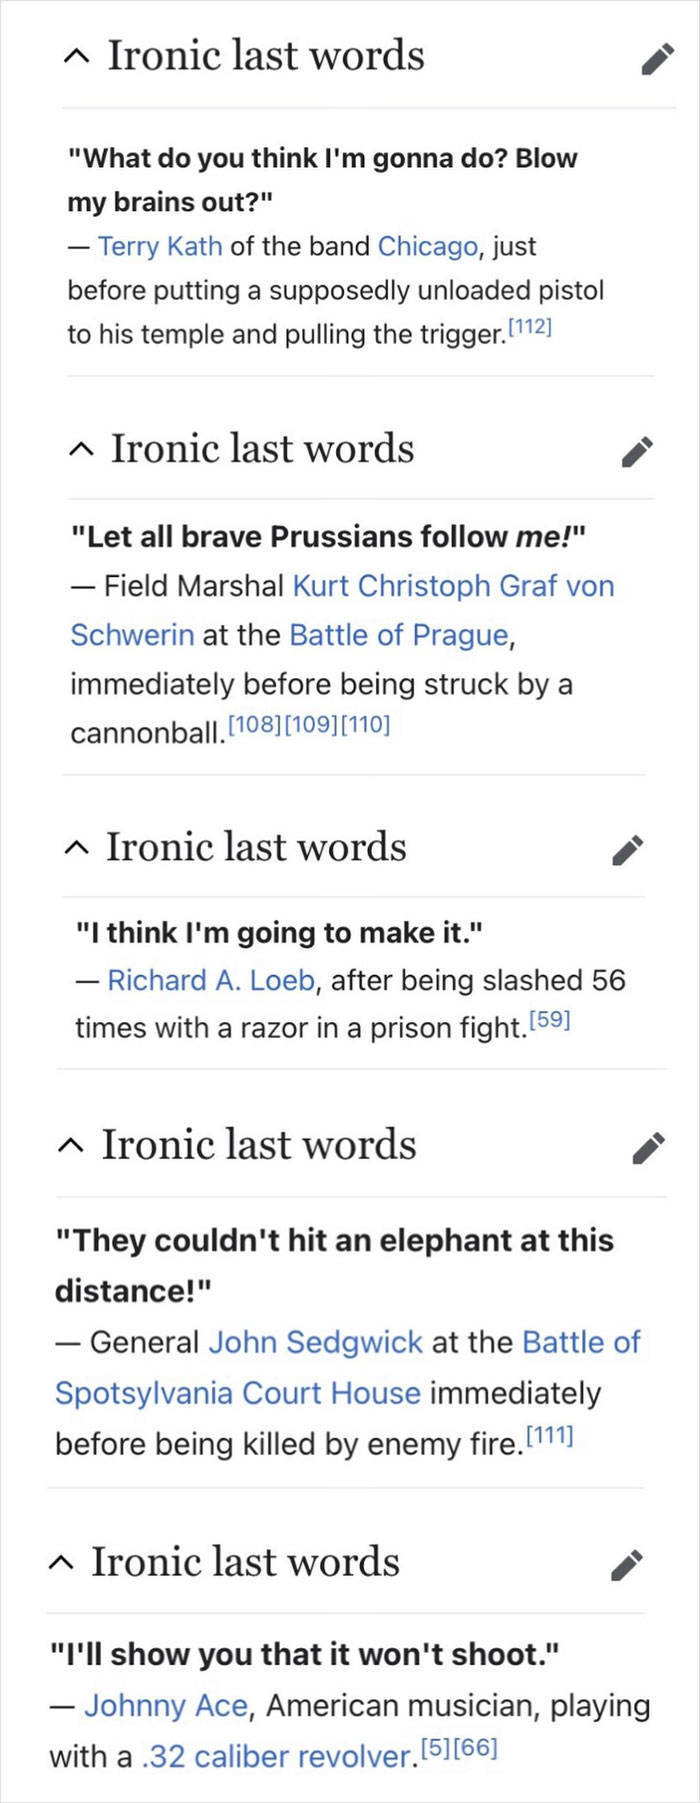 These “Wikipedia” Articles Are Pretty Weird…